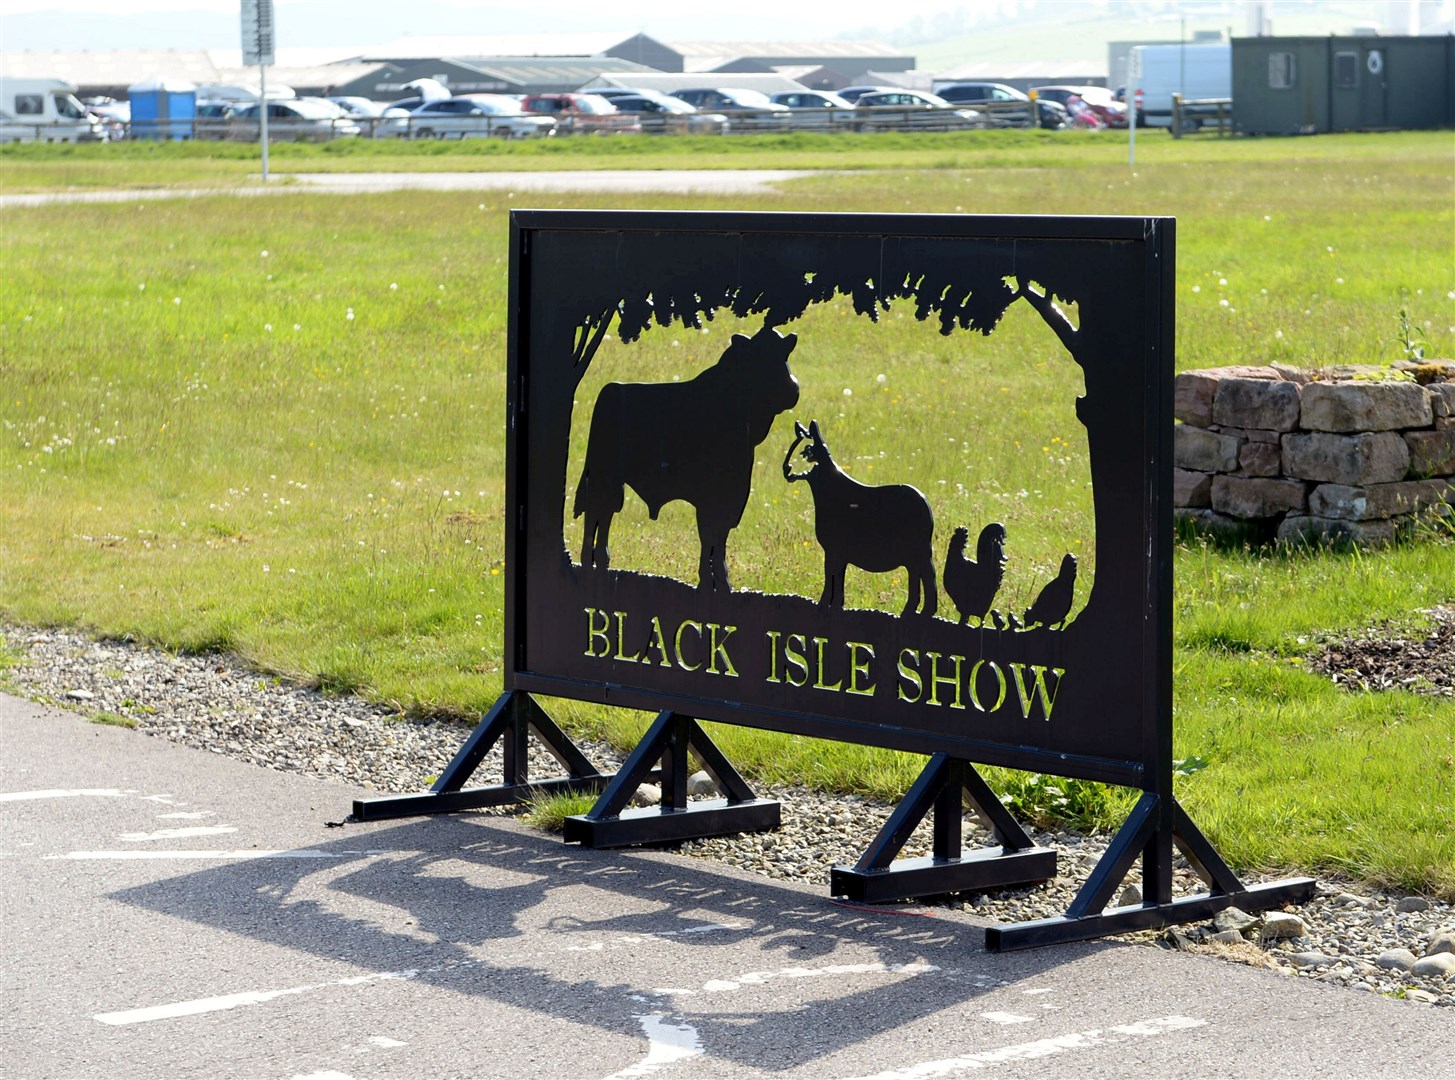 The Black Isle Showground will host the event with plenty of ventilation guaranteed and one-way systems in place.